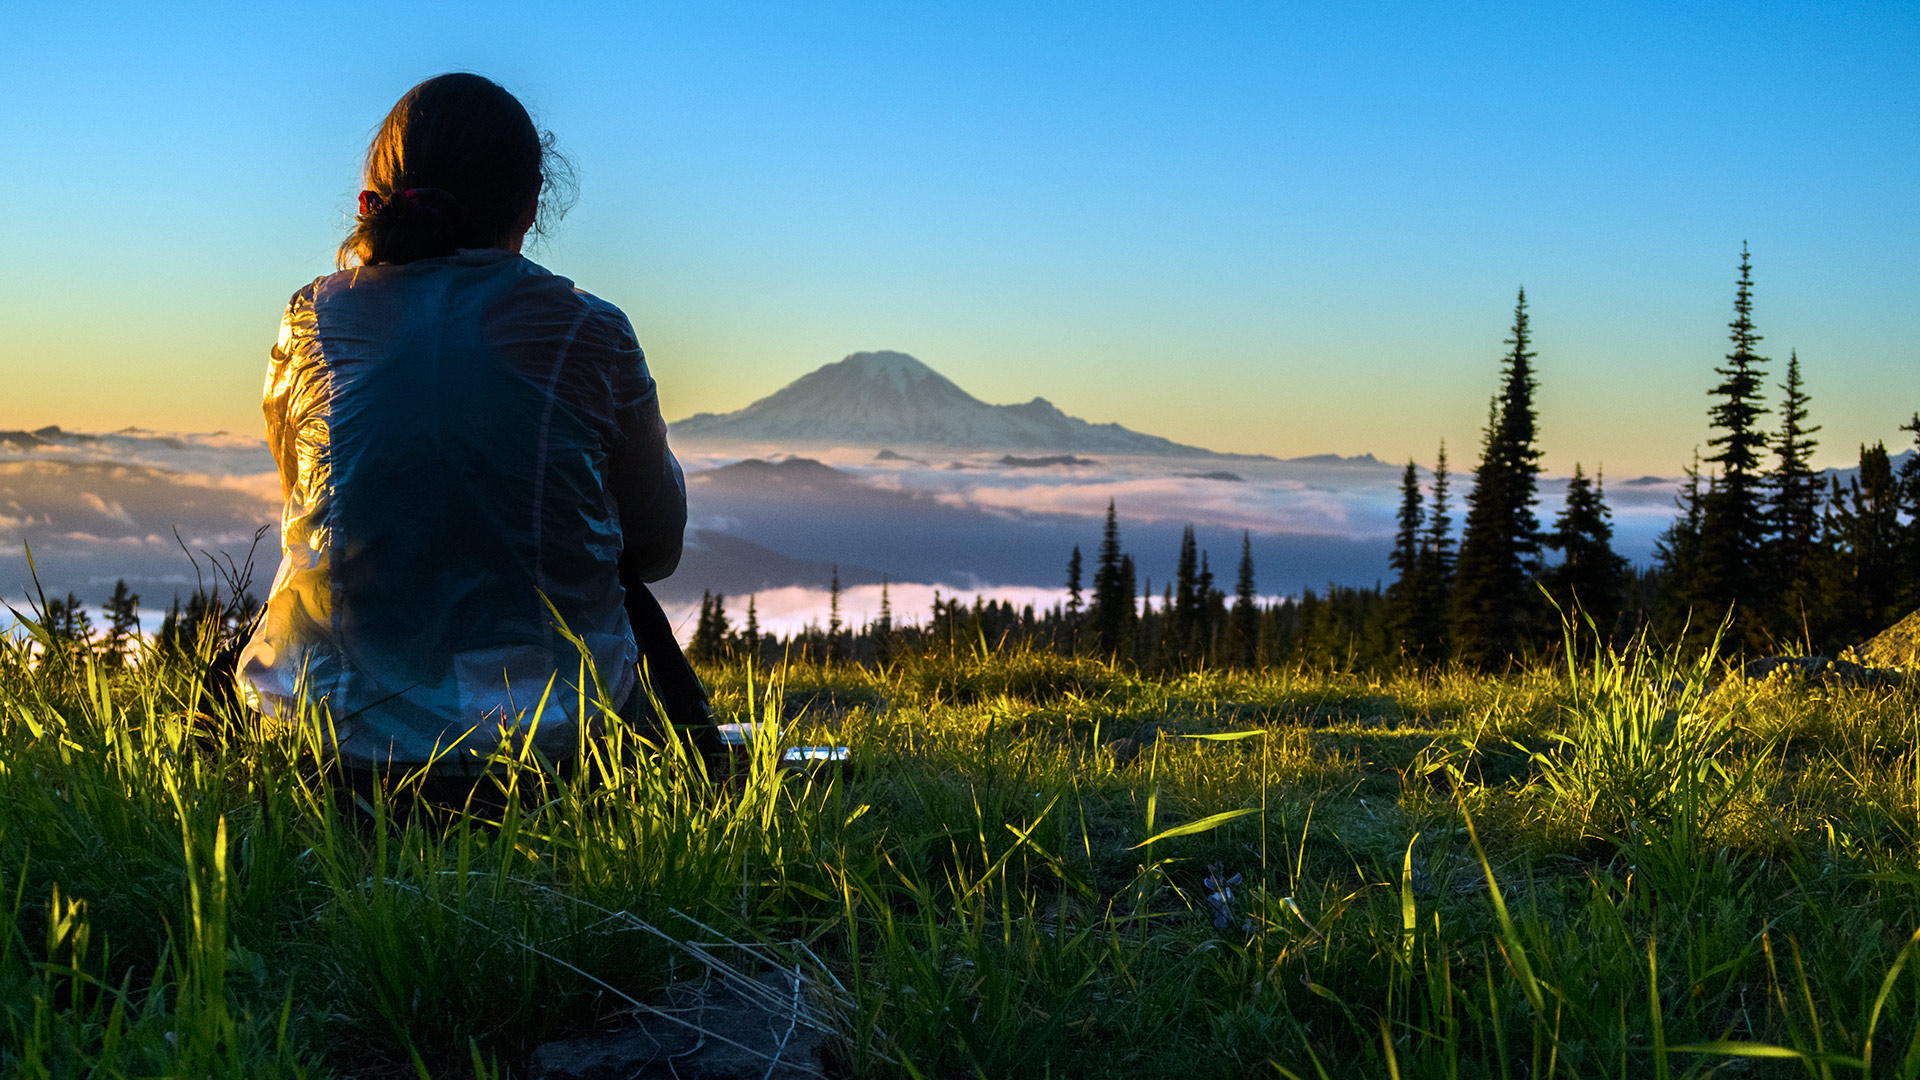 Practice gratitude and kindness. Thousands will follow in your footsteps. "CC' relaxes at the end of the day - enjoying the setting sun and view of Mt Rainier. Photo by Lisa Frugoli